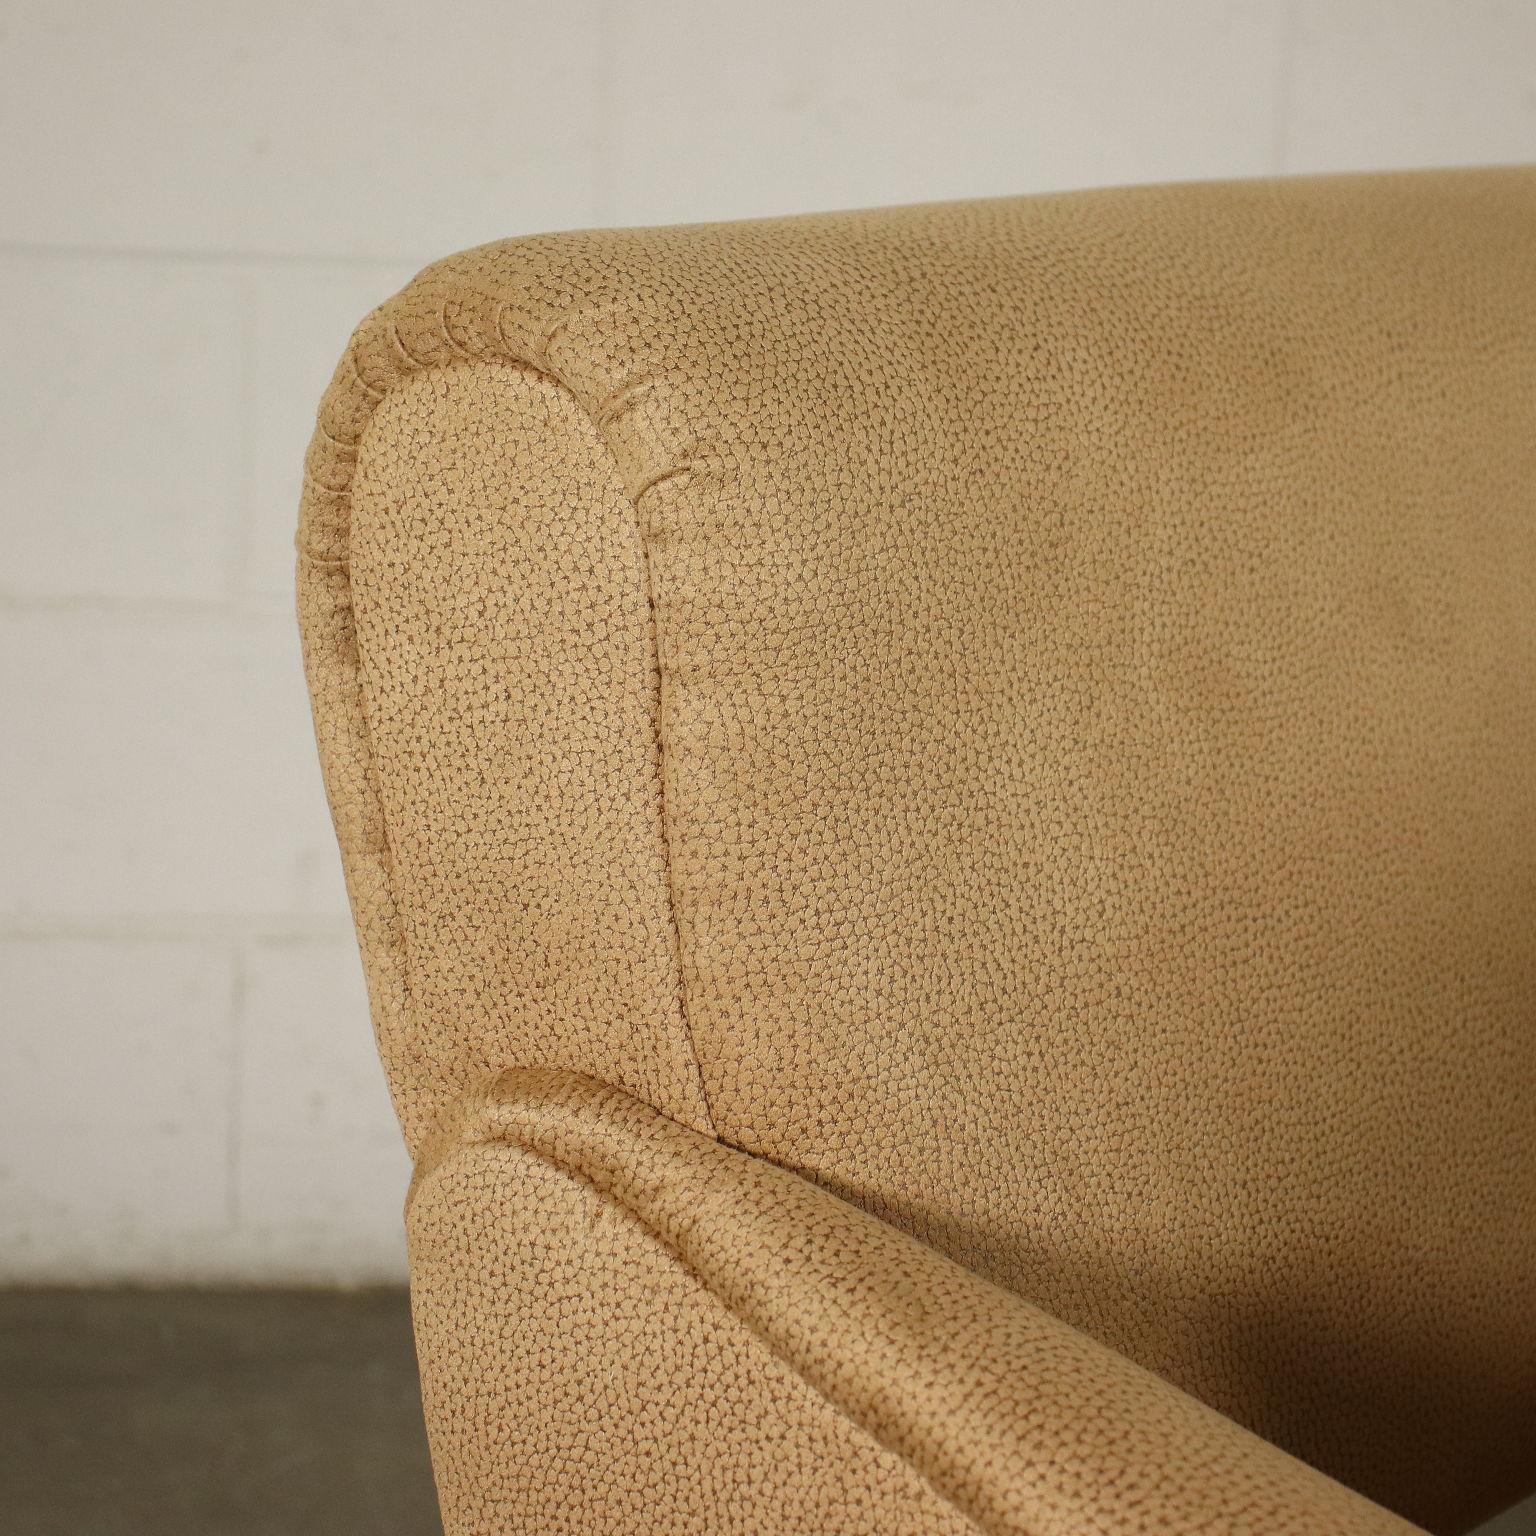 Italian Pair of Armchairs Foam Leatherette, Italy, 1950s 1960s For Sale